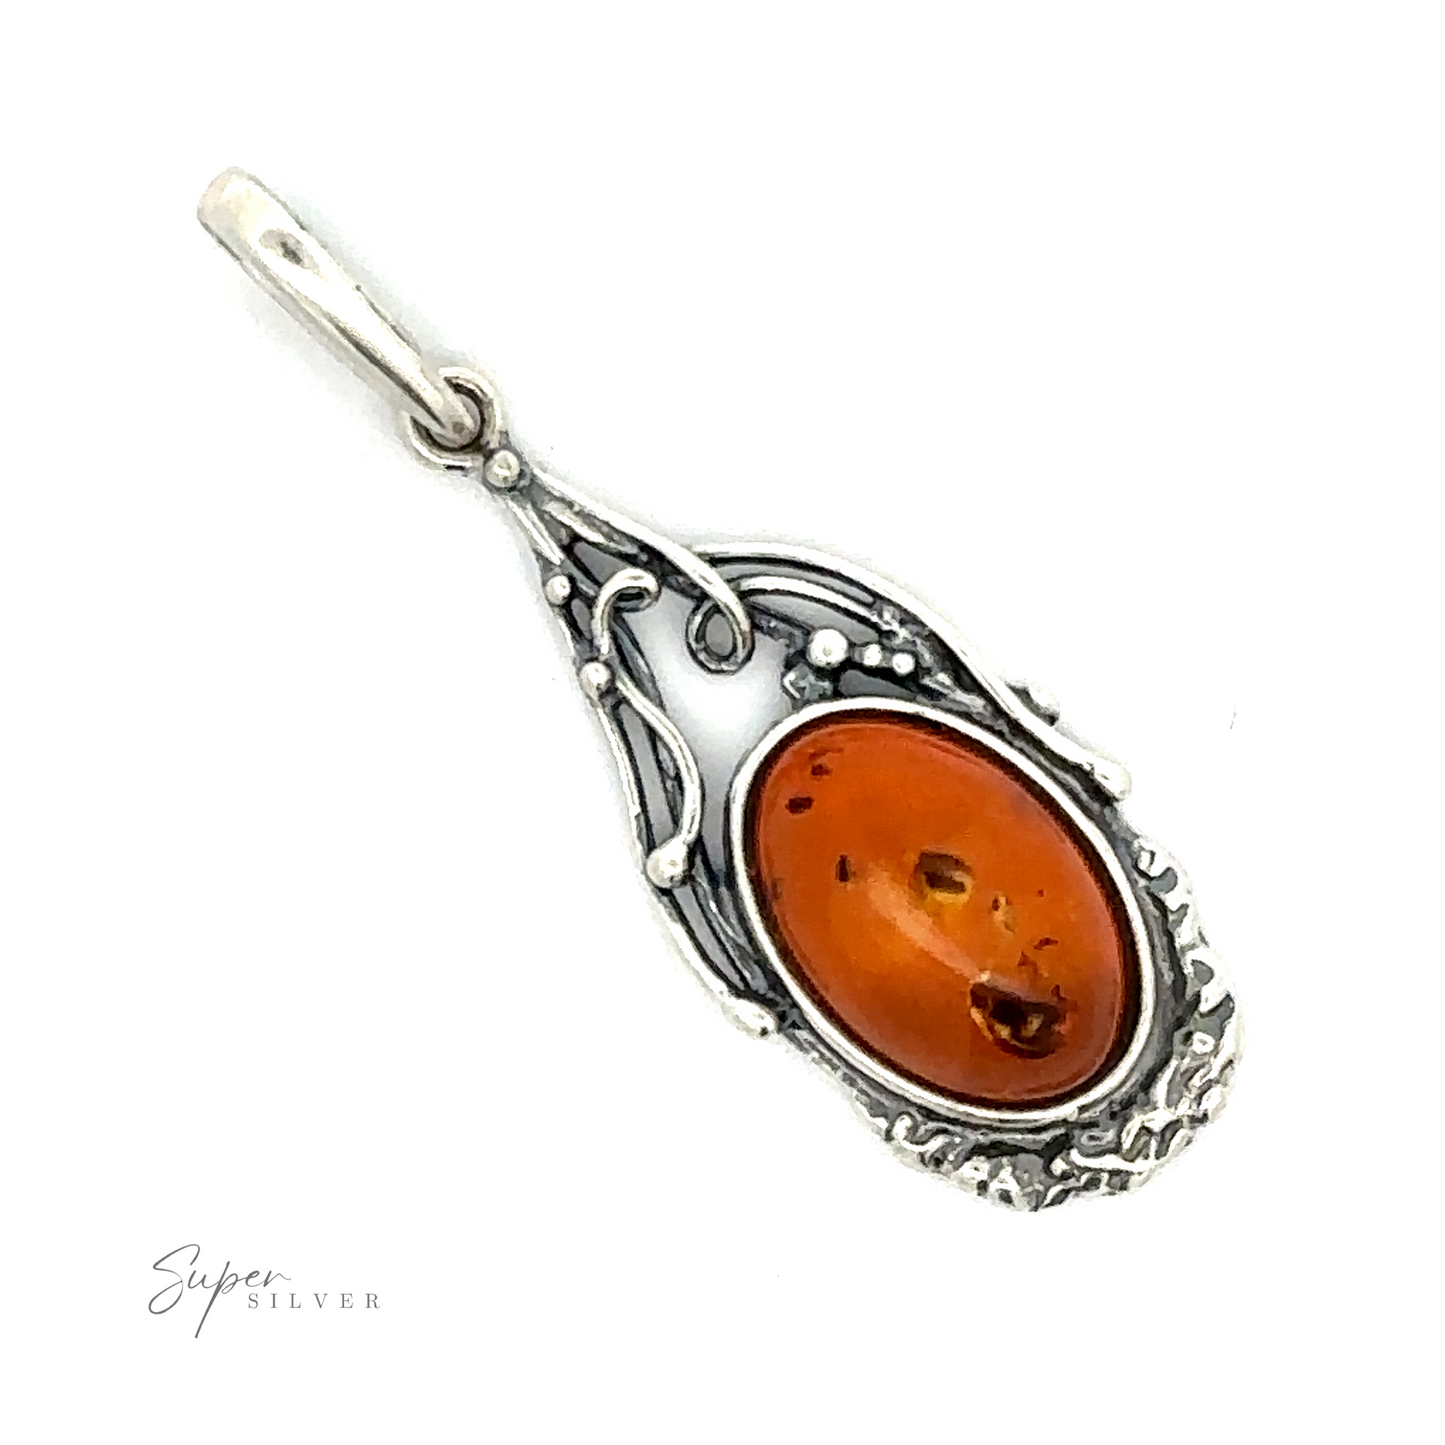 
                  
                    An Antique Style Amber Pendant with an oval Baltic Amber gemstone set in an intricately designed vintage-styled frame, featuring small decorative elements. The word "Super Silver" is lightly visible in the lower left corner.
                  
                